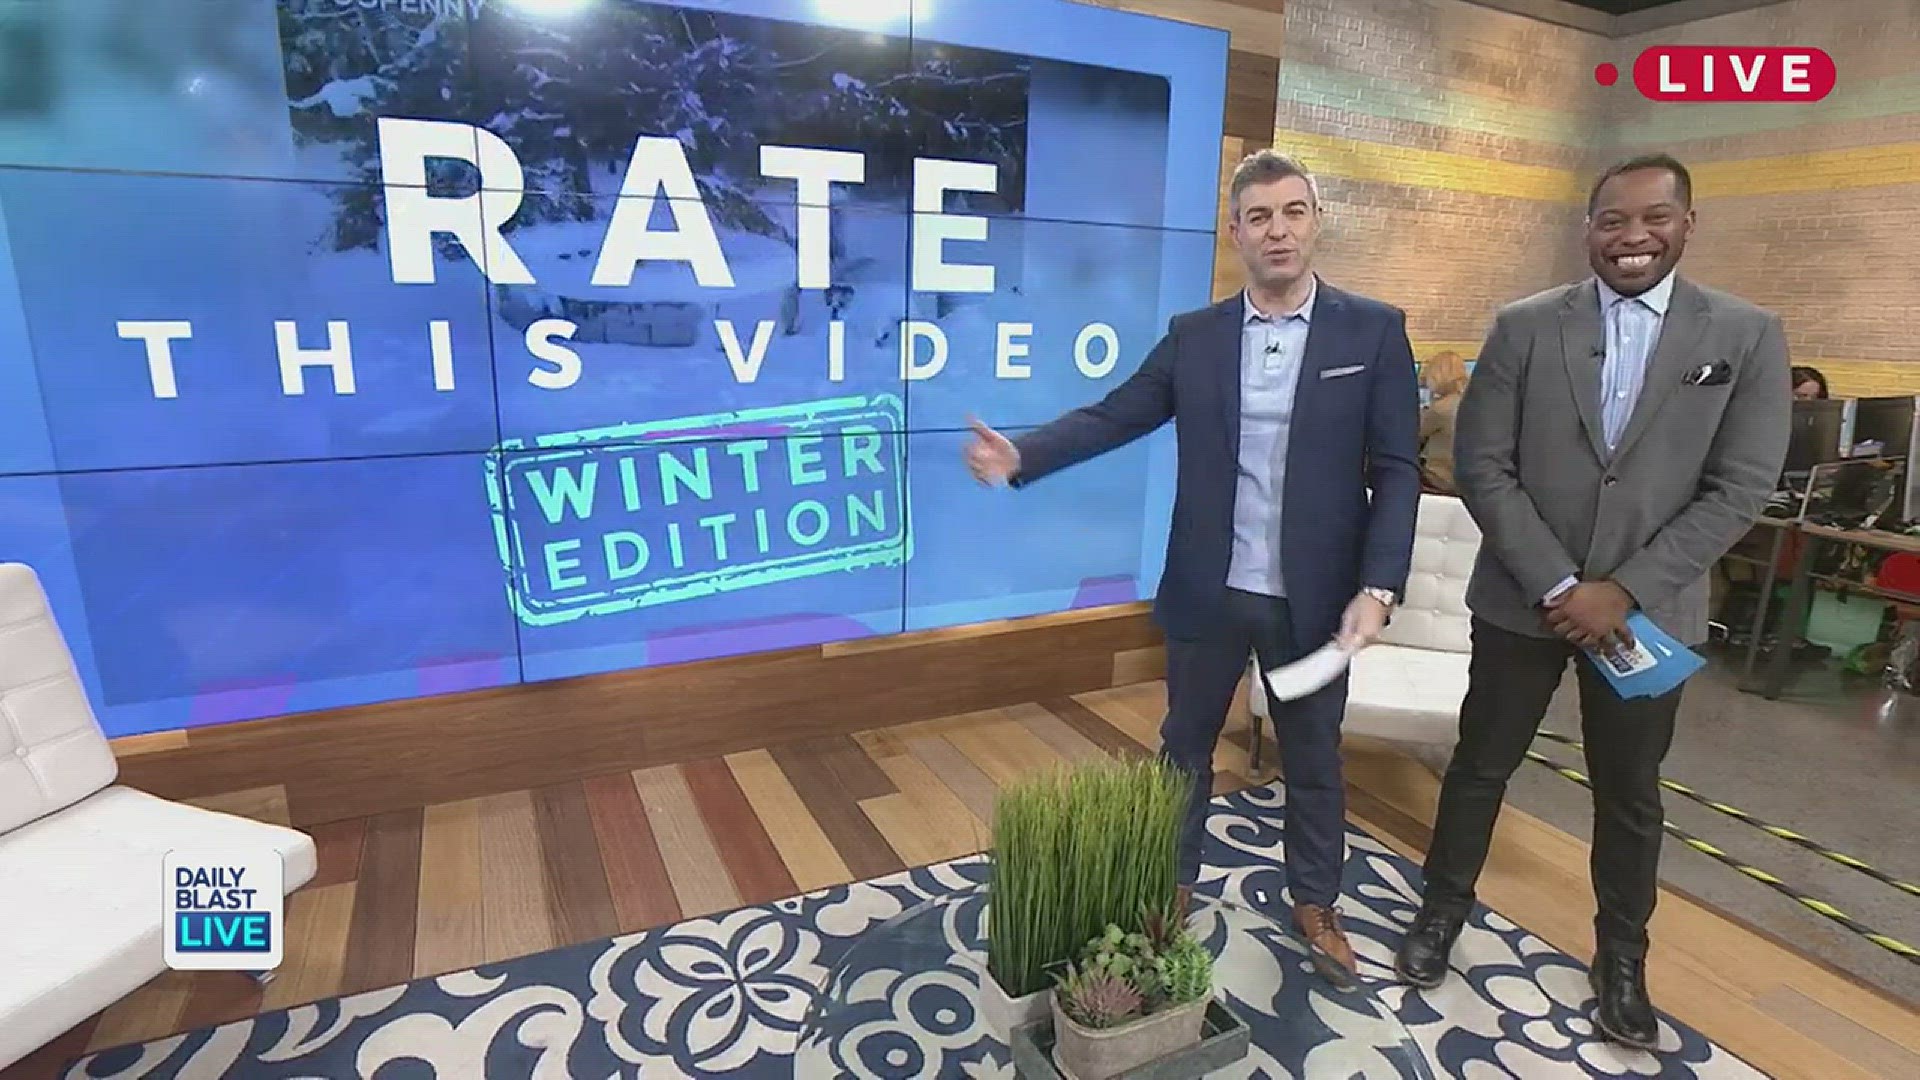 Al Jackson rates some of the funniest viral videos of the week. From parasailing in the snow to a frozen pond, Al Jackson is rating the best viral videos in this winter edition of Rate this Video!